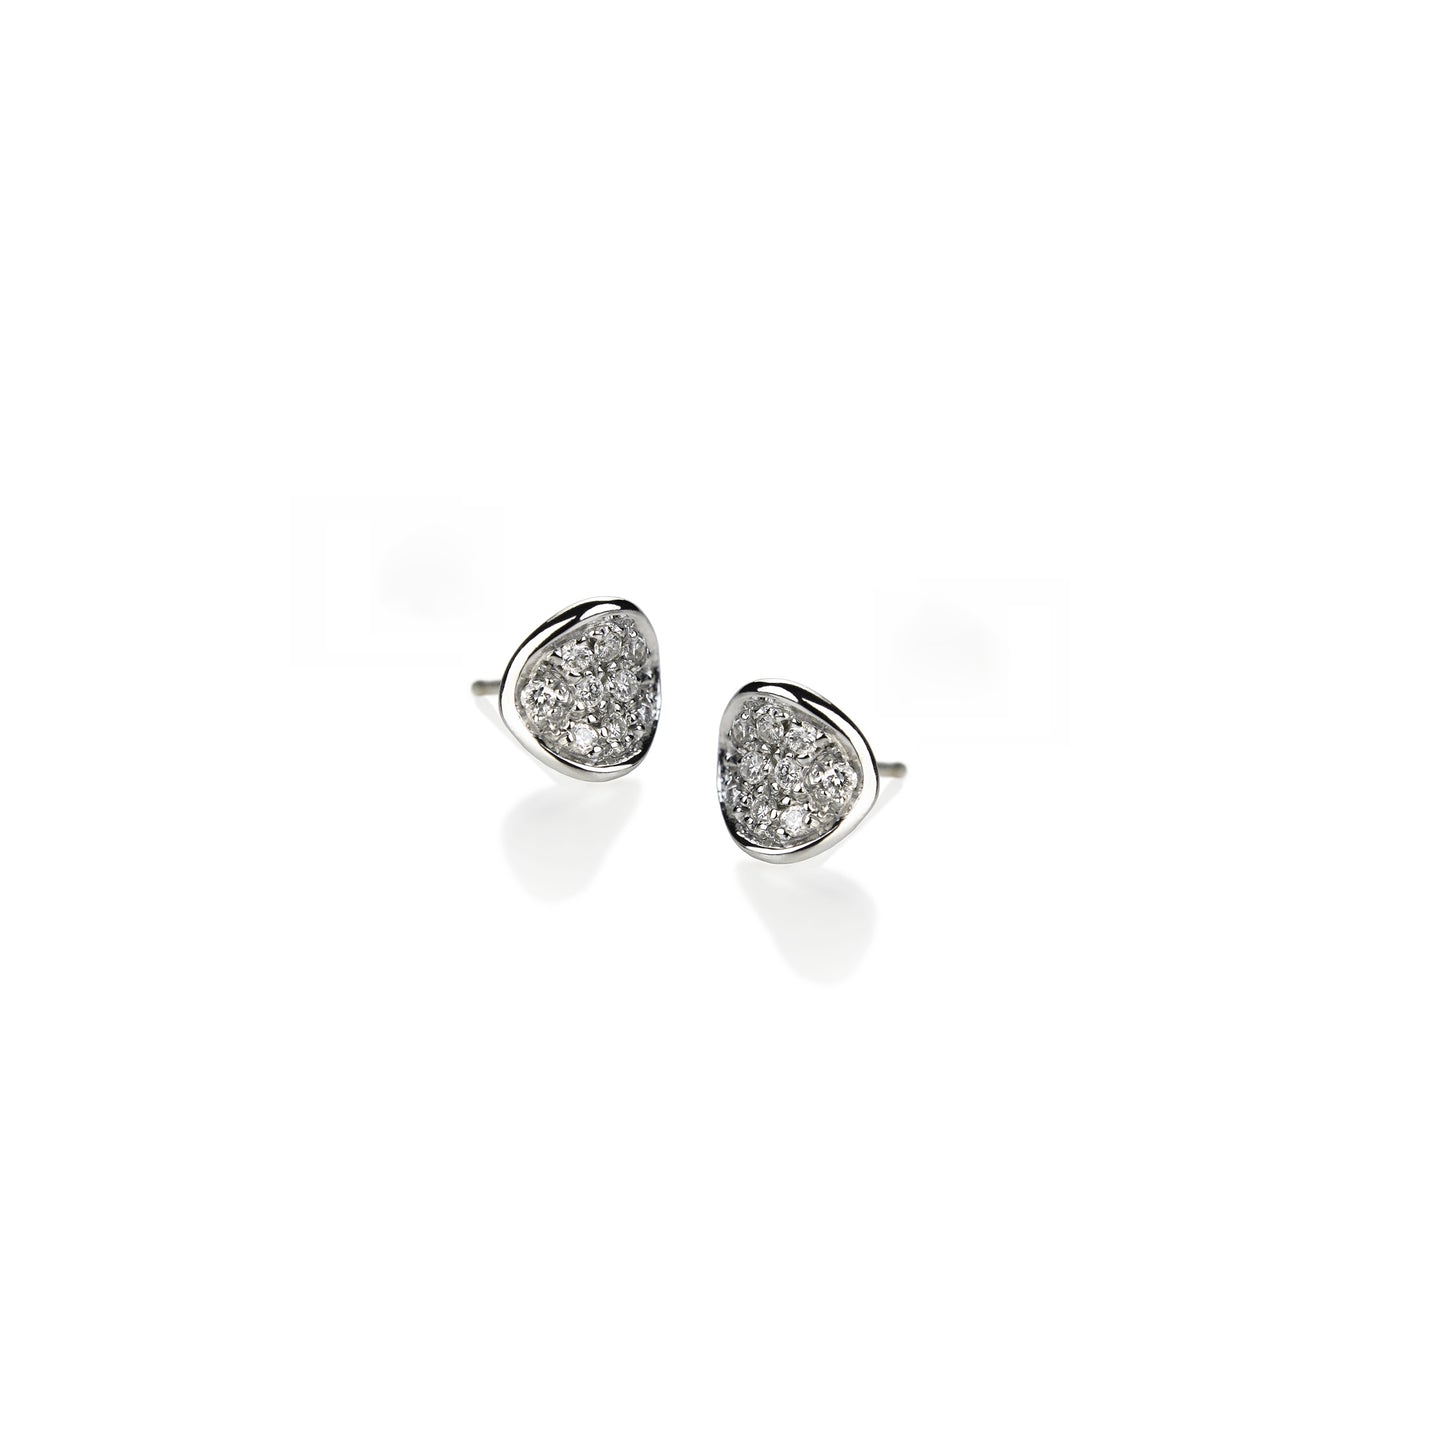 Studs earrings in gold and diamonds pavè